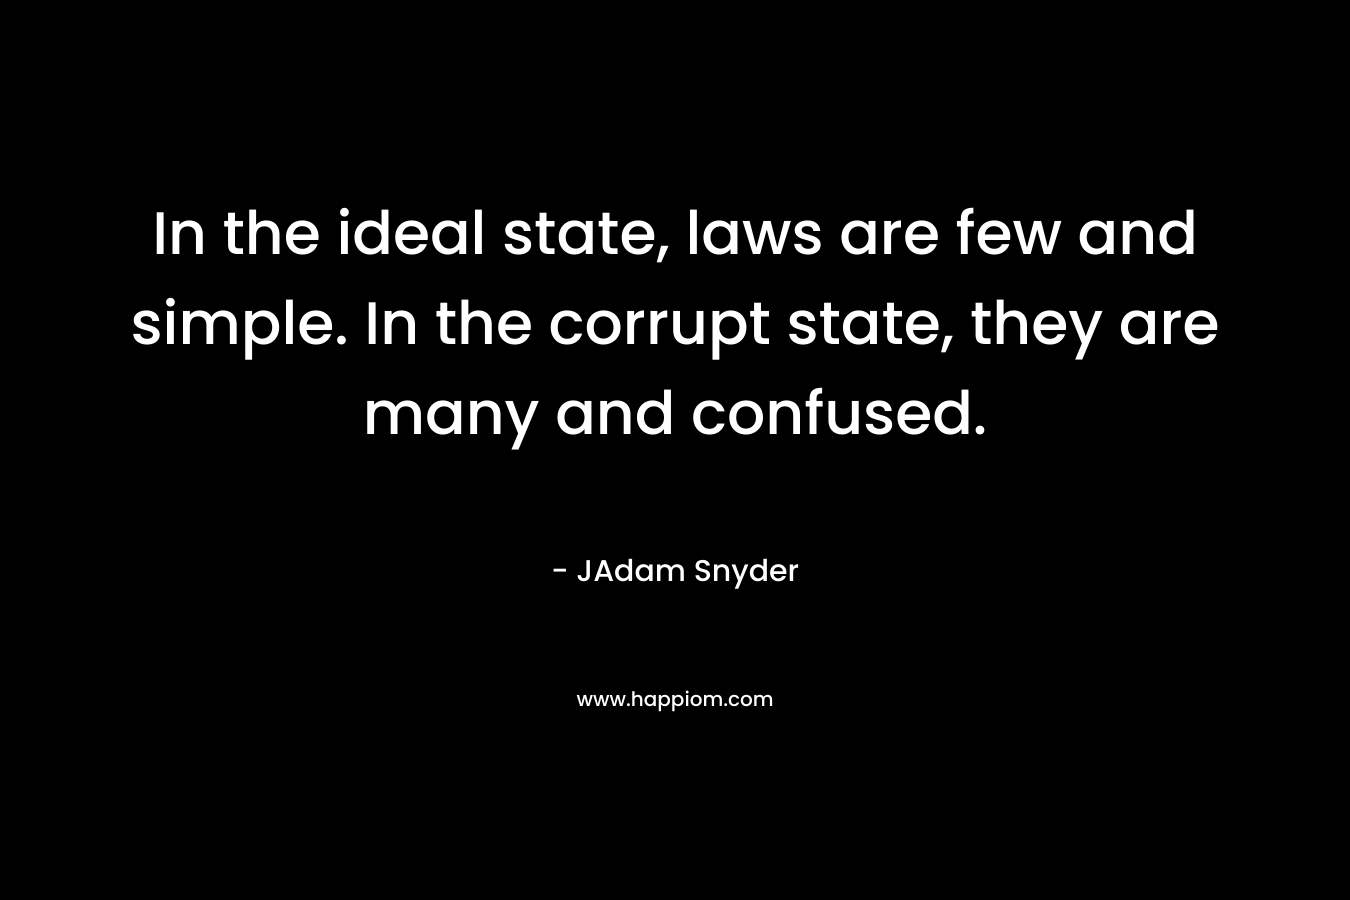 In the ideal state, laws are few and simple. In the corrupt state, they are many and confused.